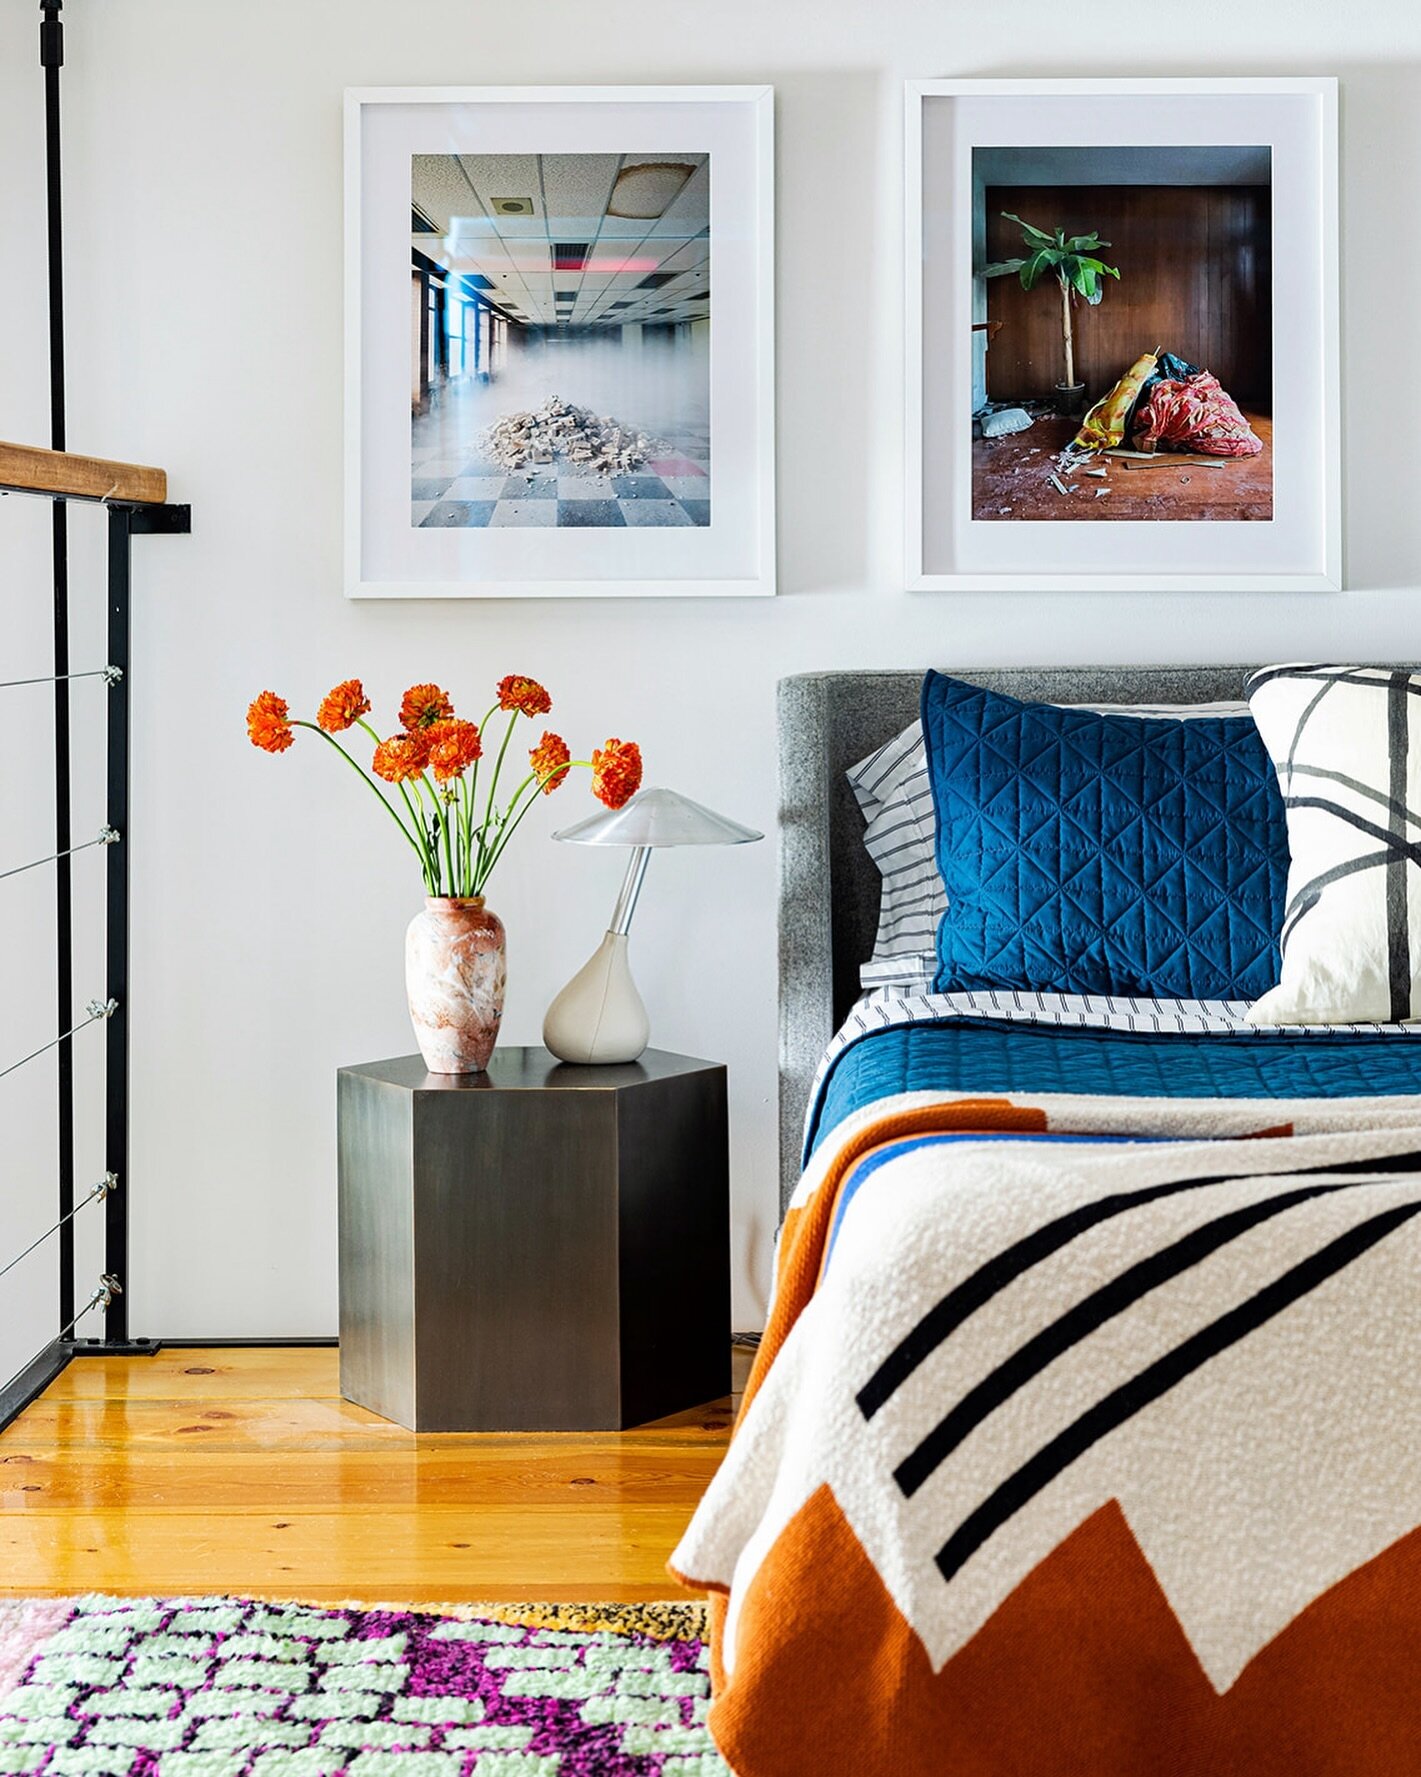 Our advice? Go bold in your guest bedroom! Here, iconic Piccola lamps perch on nightstands under artwork by @andrew_emond in Rob&rsquo;s loft. A statement throw by @happyhabitat and a shag rug Rob picked up in Marrakech make for a memorable stay. 

?